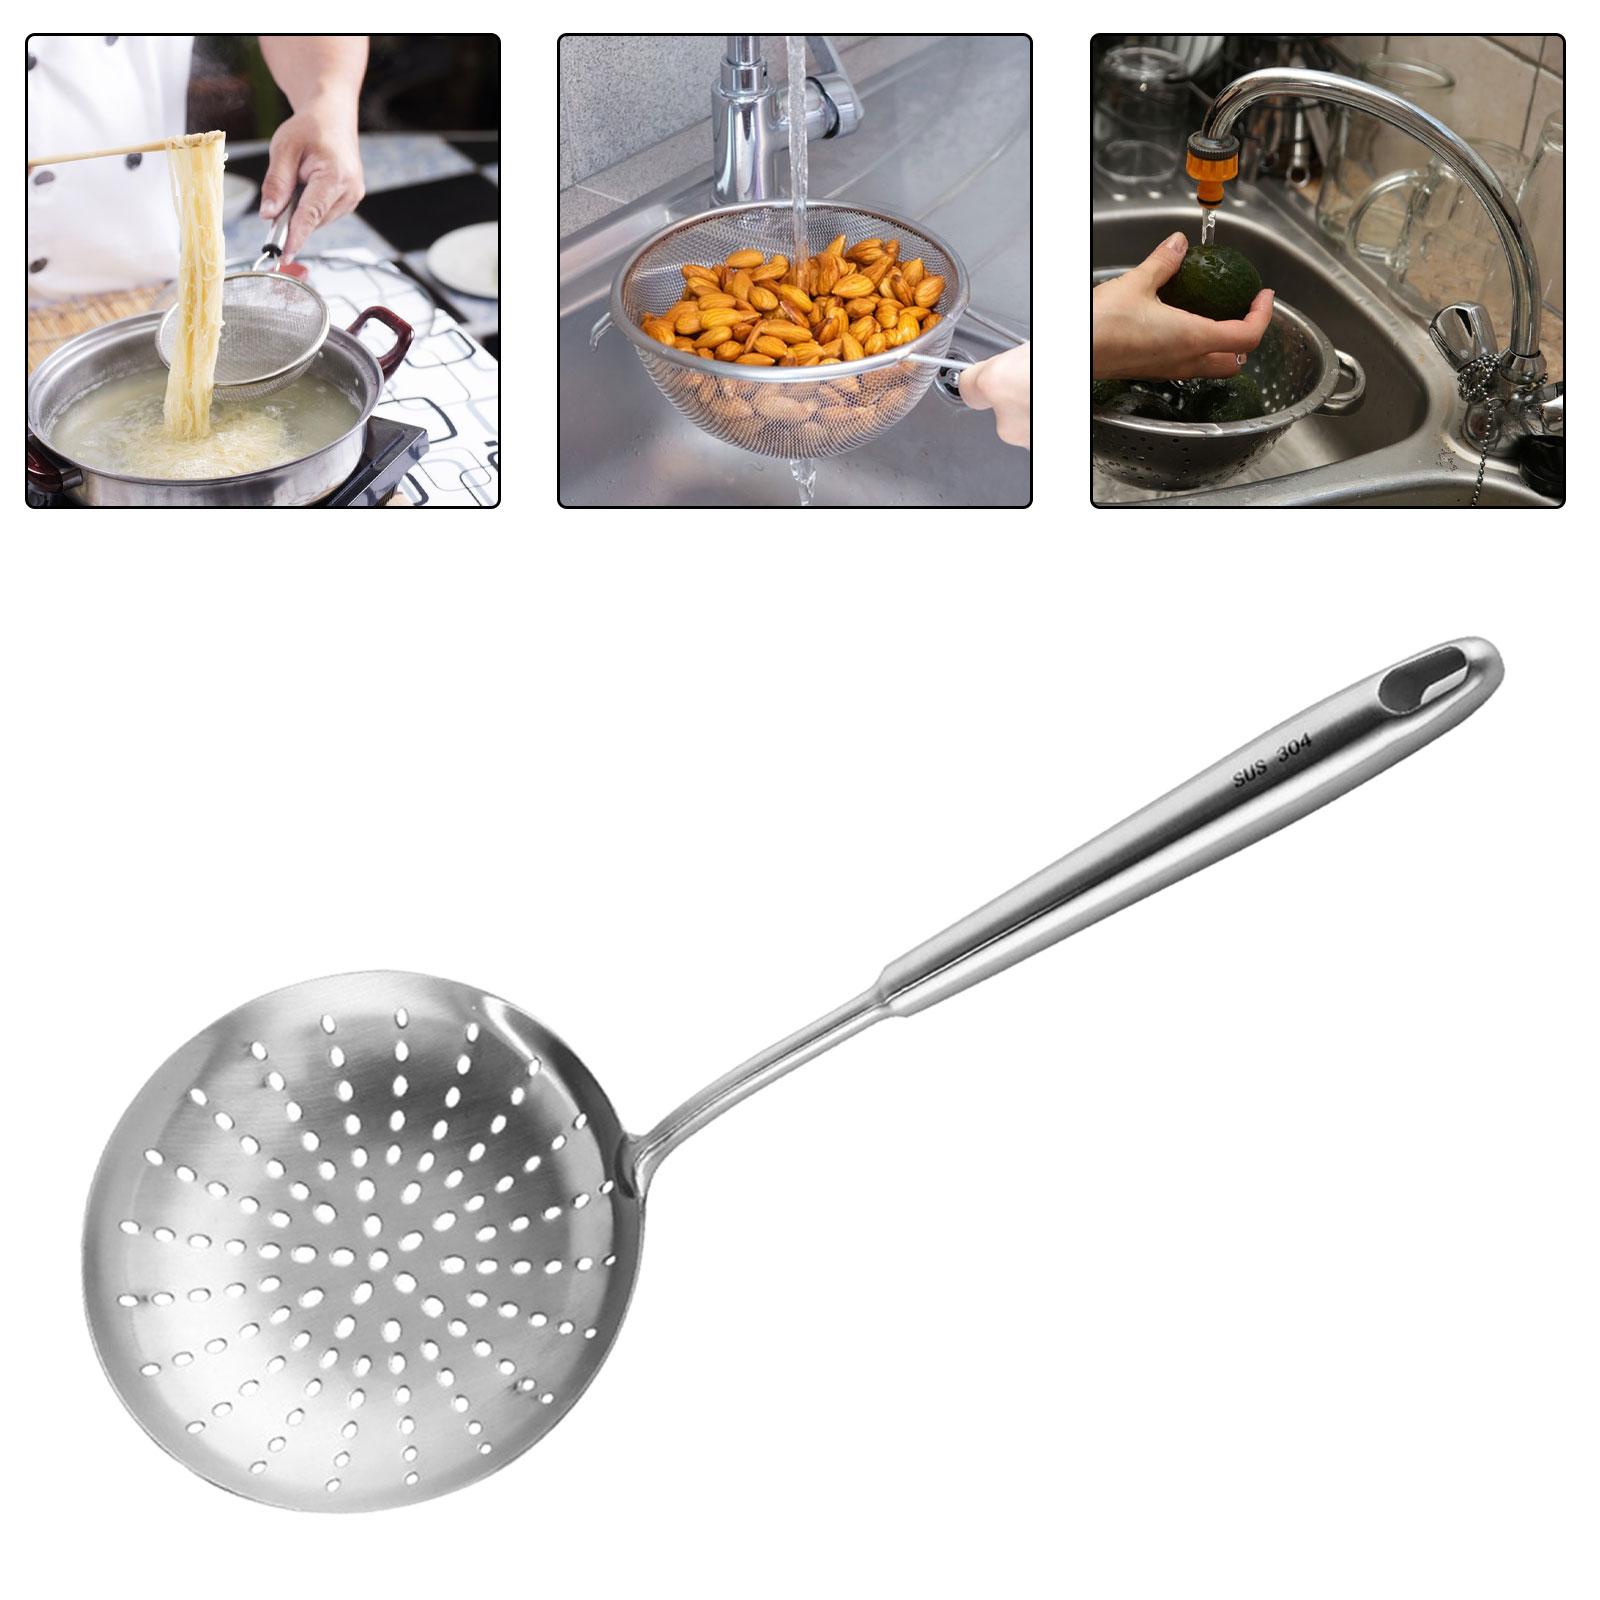 Skimmer Slotted Spoon Stainless Steel Deep Frying Skimmer Spoon for Scooping - image 3 of 9